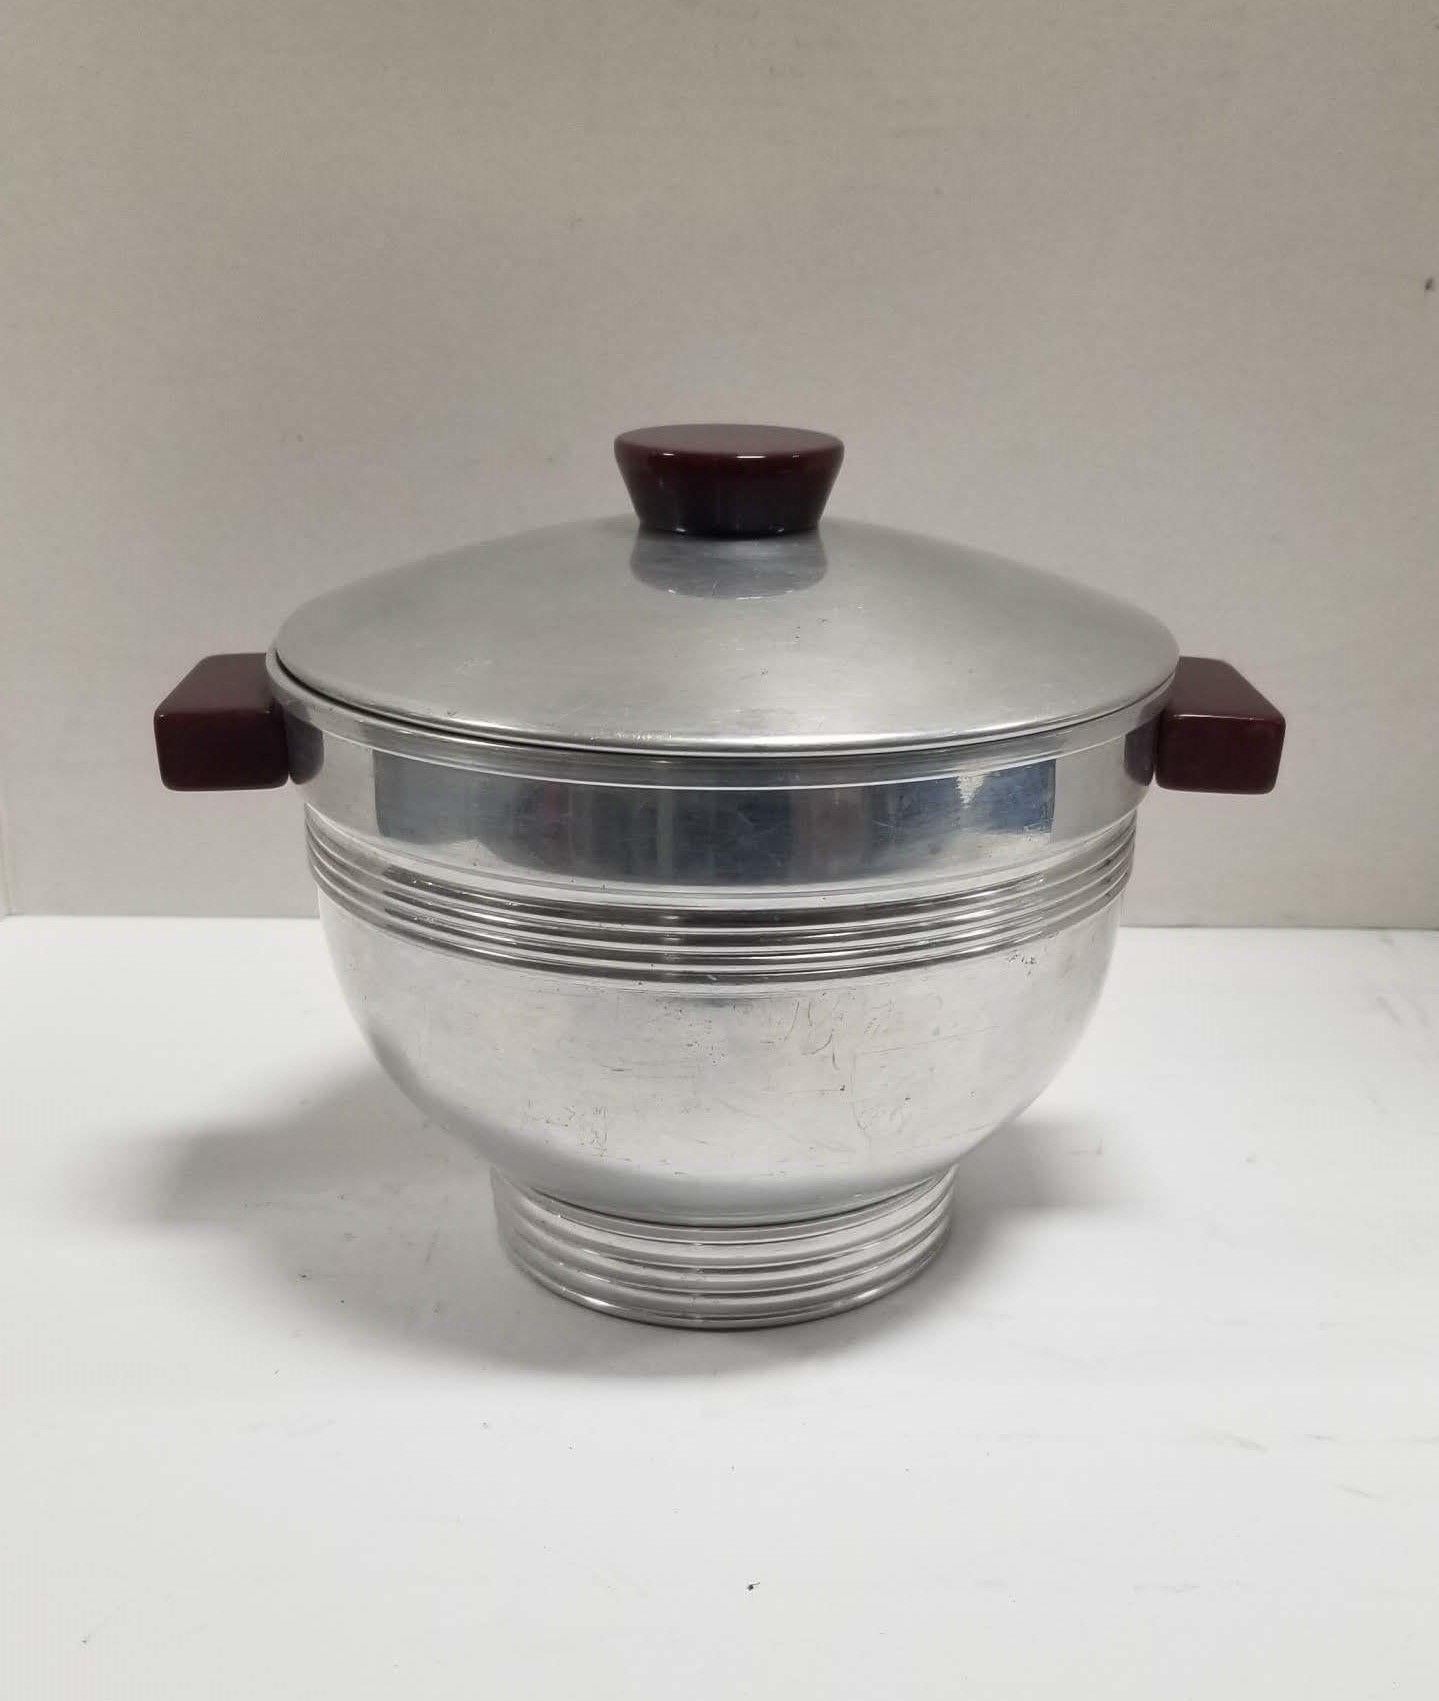 Midcentury era chromed ice bucket with Bakelite handles and lid top.
This midcentury chromed steel ice bucket is a stylish addition to any home bar. The Bakelite handles provide a comfortable grip and a touch of contrasting color to the otherwise